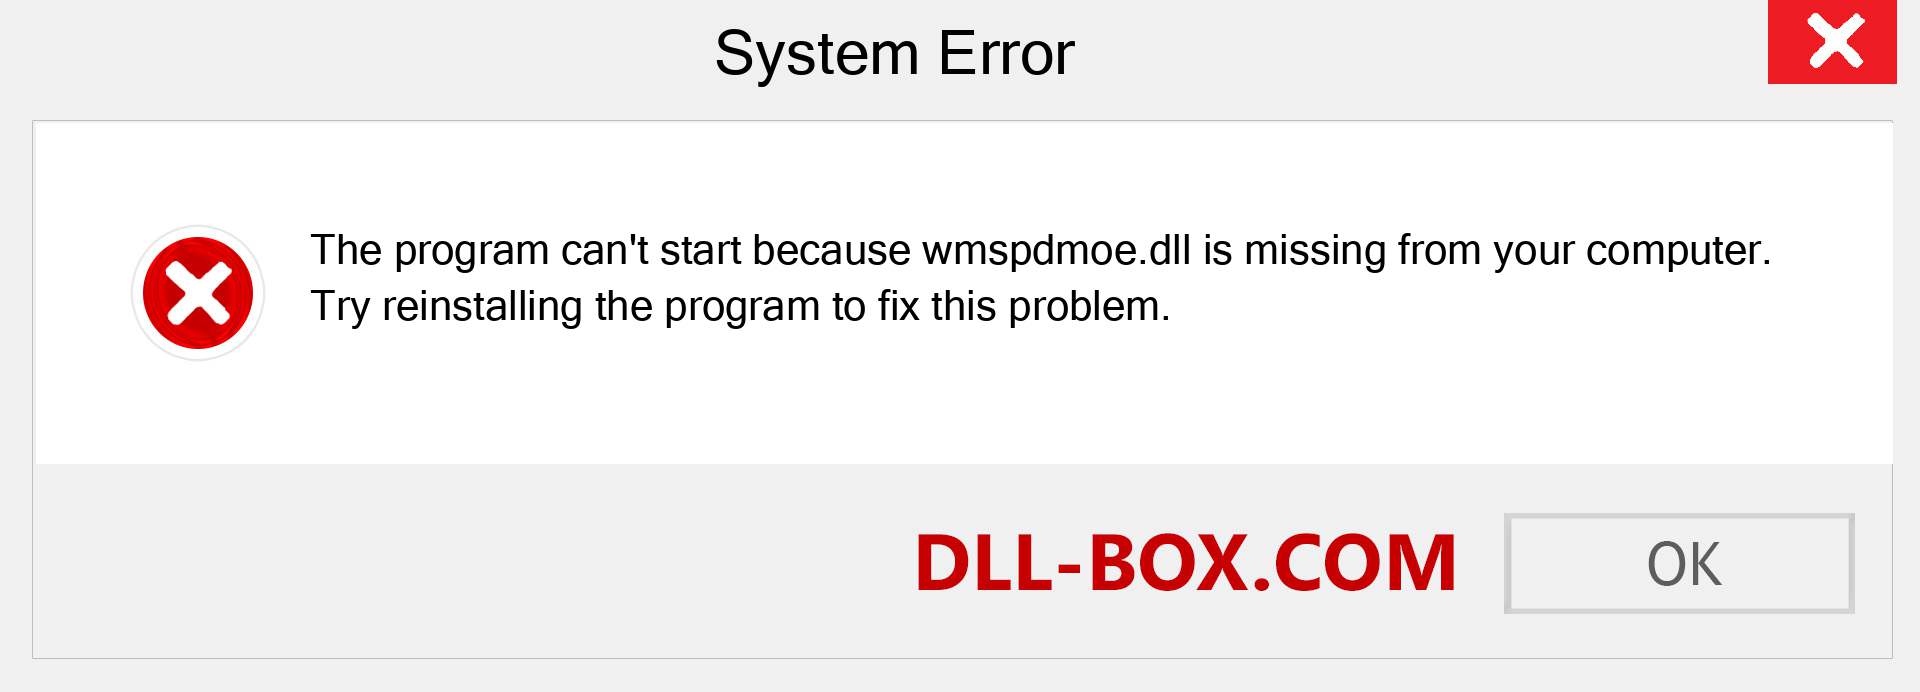  wmspdmoe.dll file is missing?. Download for Windows 7, 8, 10 - Fix  wmspdmoe dll Missing Error on Windows, photos, images